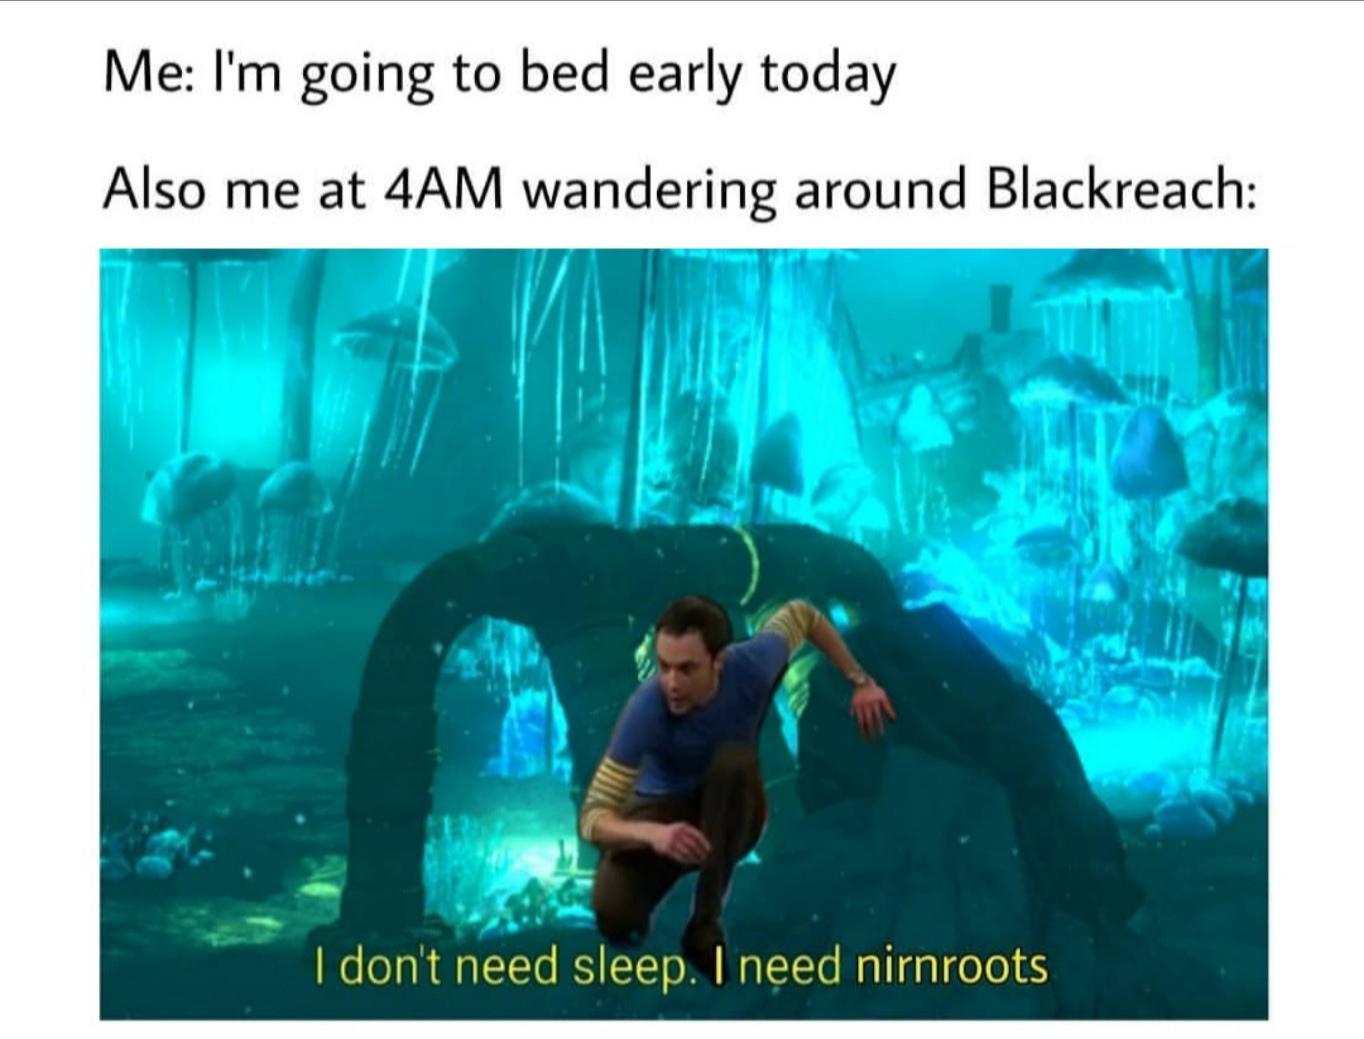 skyrim levels meme - Me I'm going to bed early today Also me at 4AM wandering around Blackreach I don't need sleep. I need nirnroots